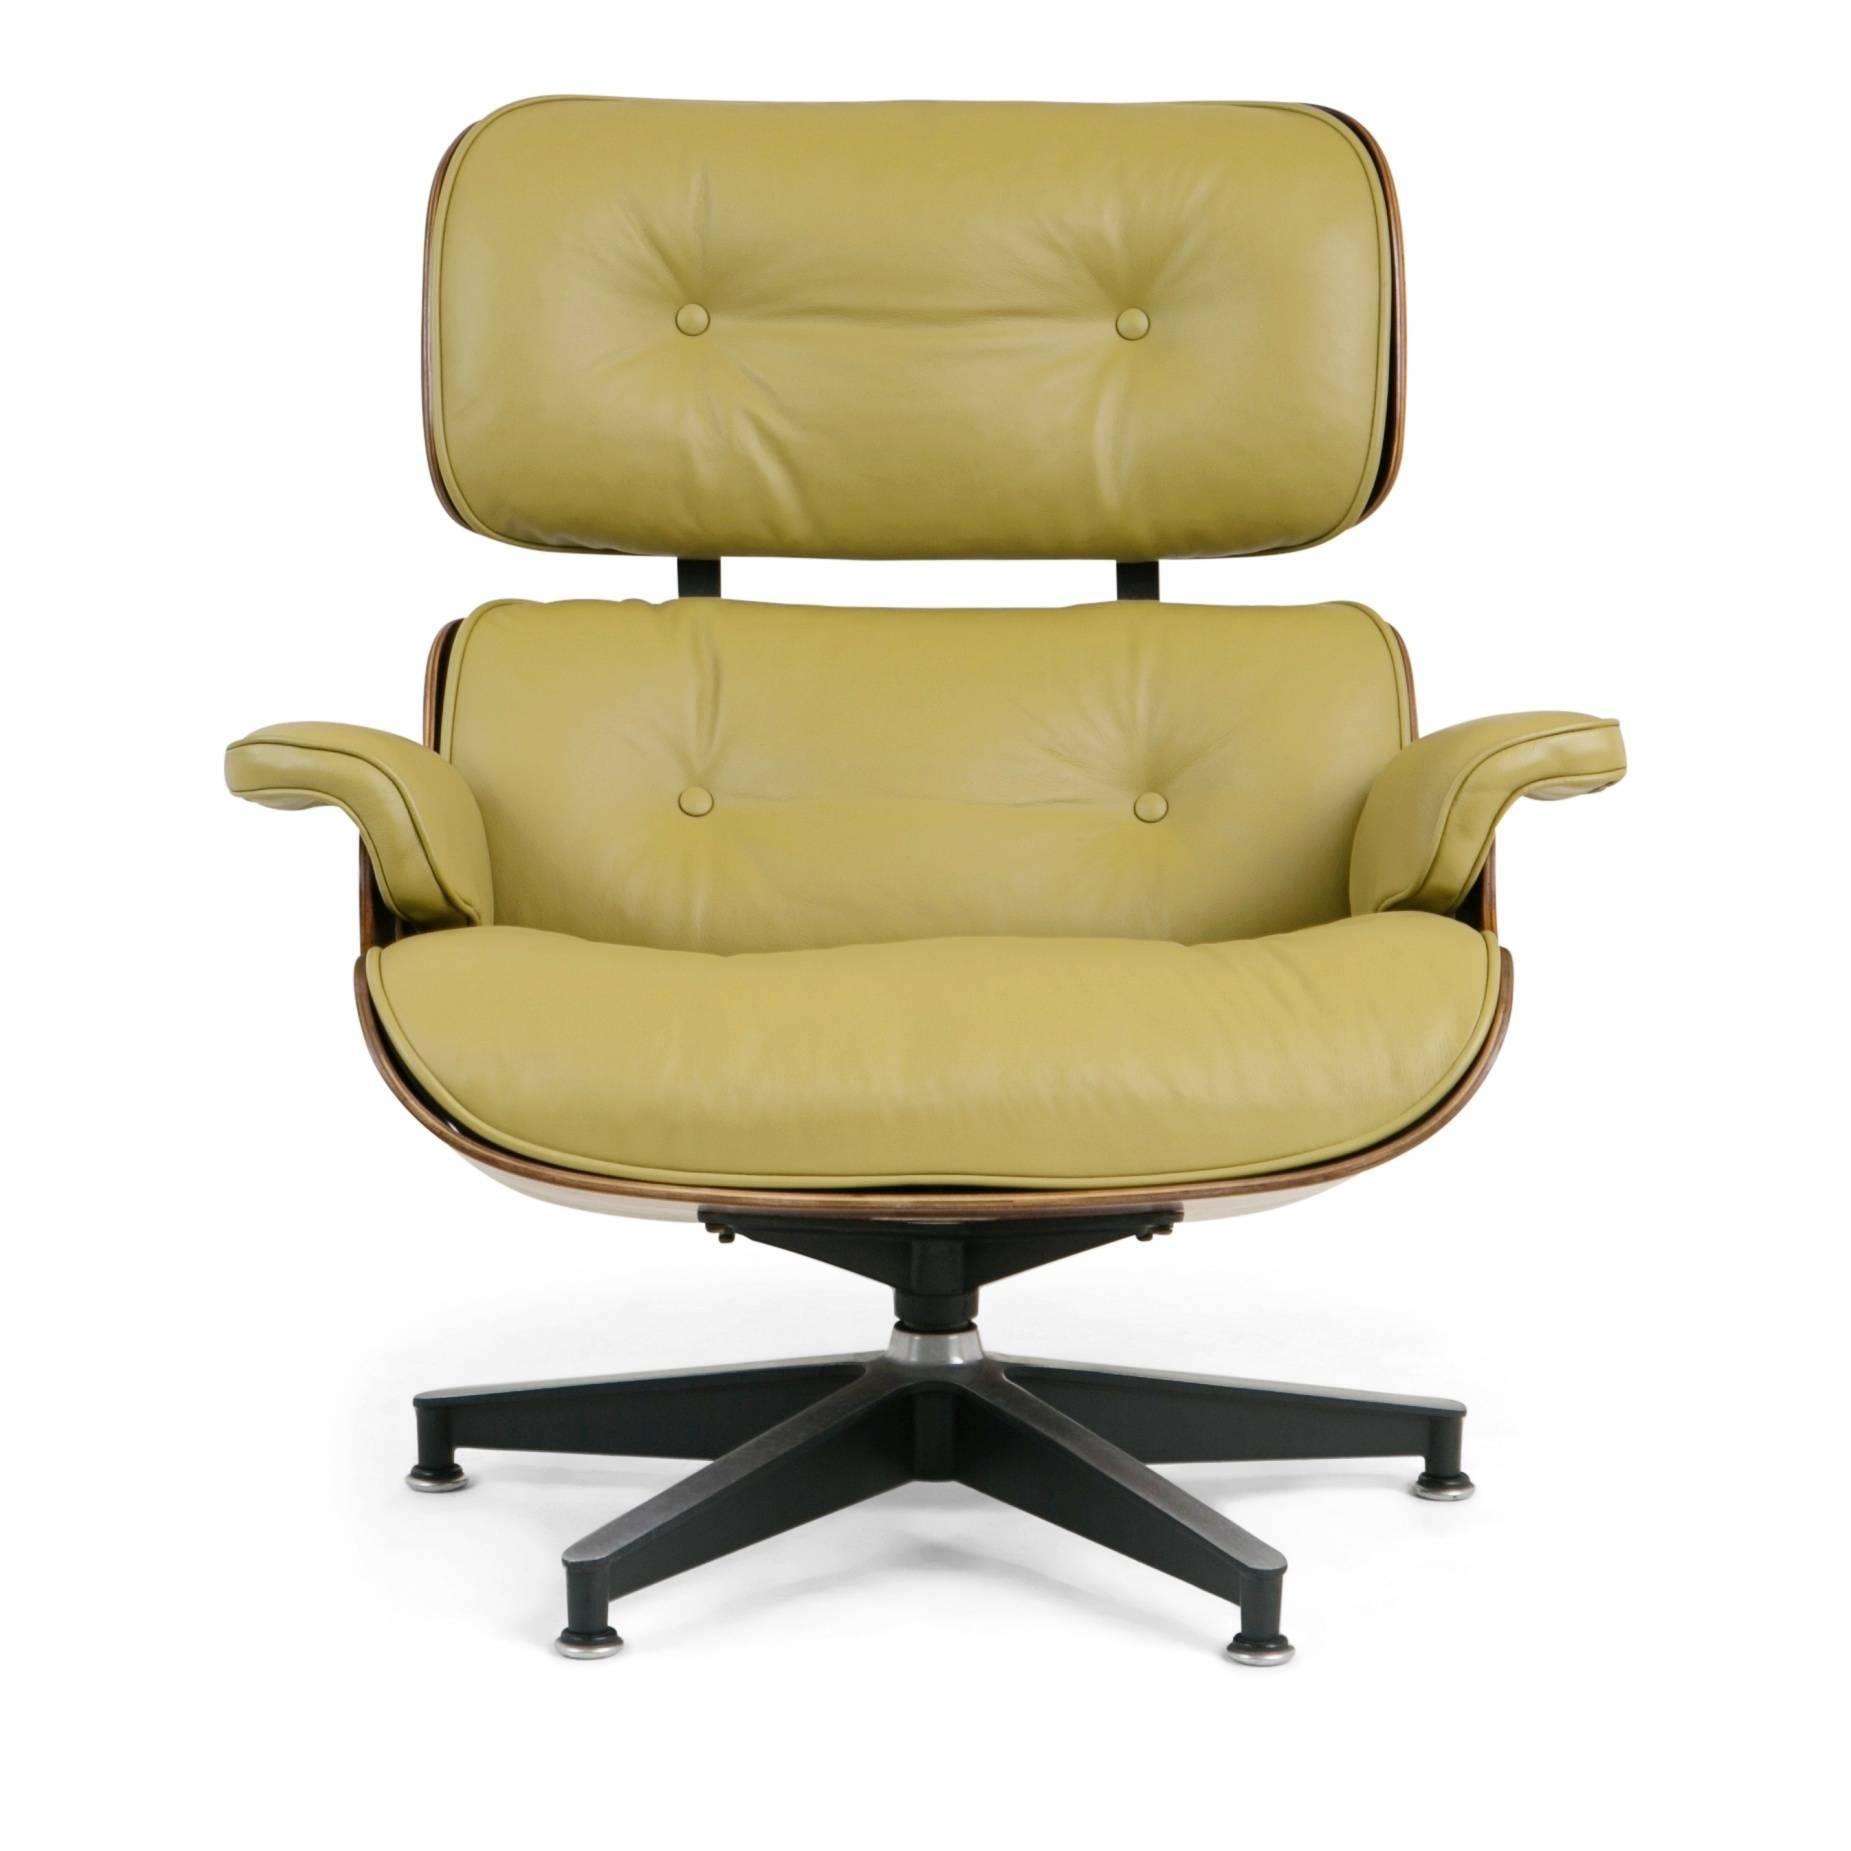 Early Production Model 670/671 Lounge Chair & Ottoman by Charles & Ray Eames (Moderne der Mitte des Jahrhunderts)